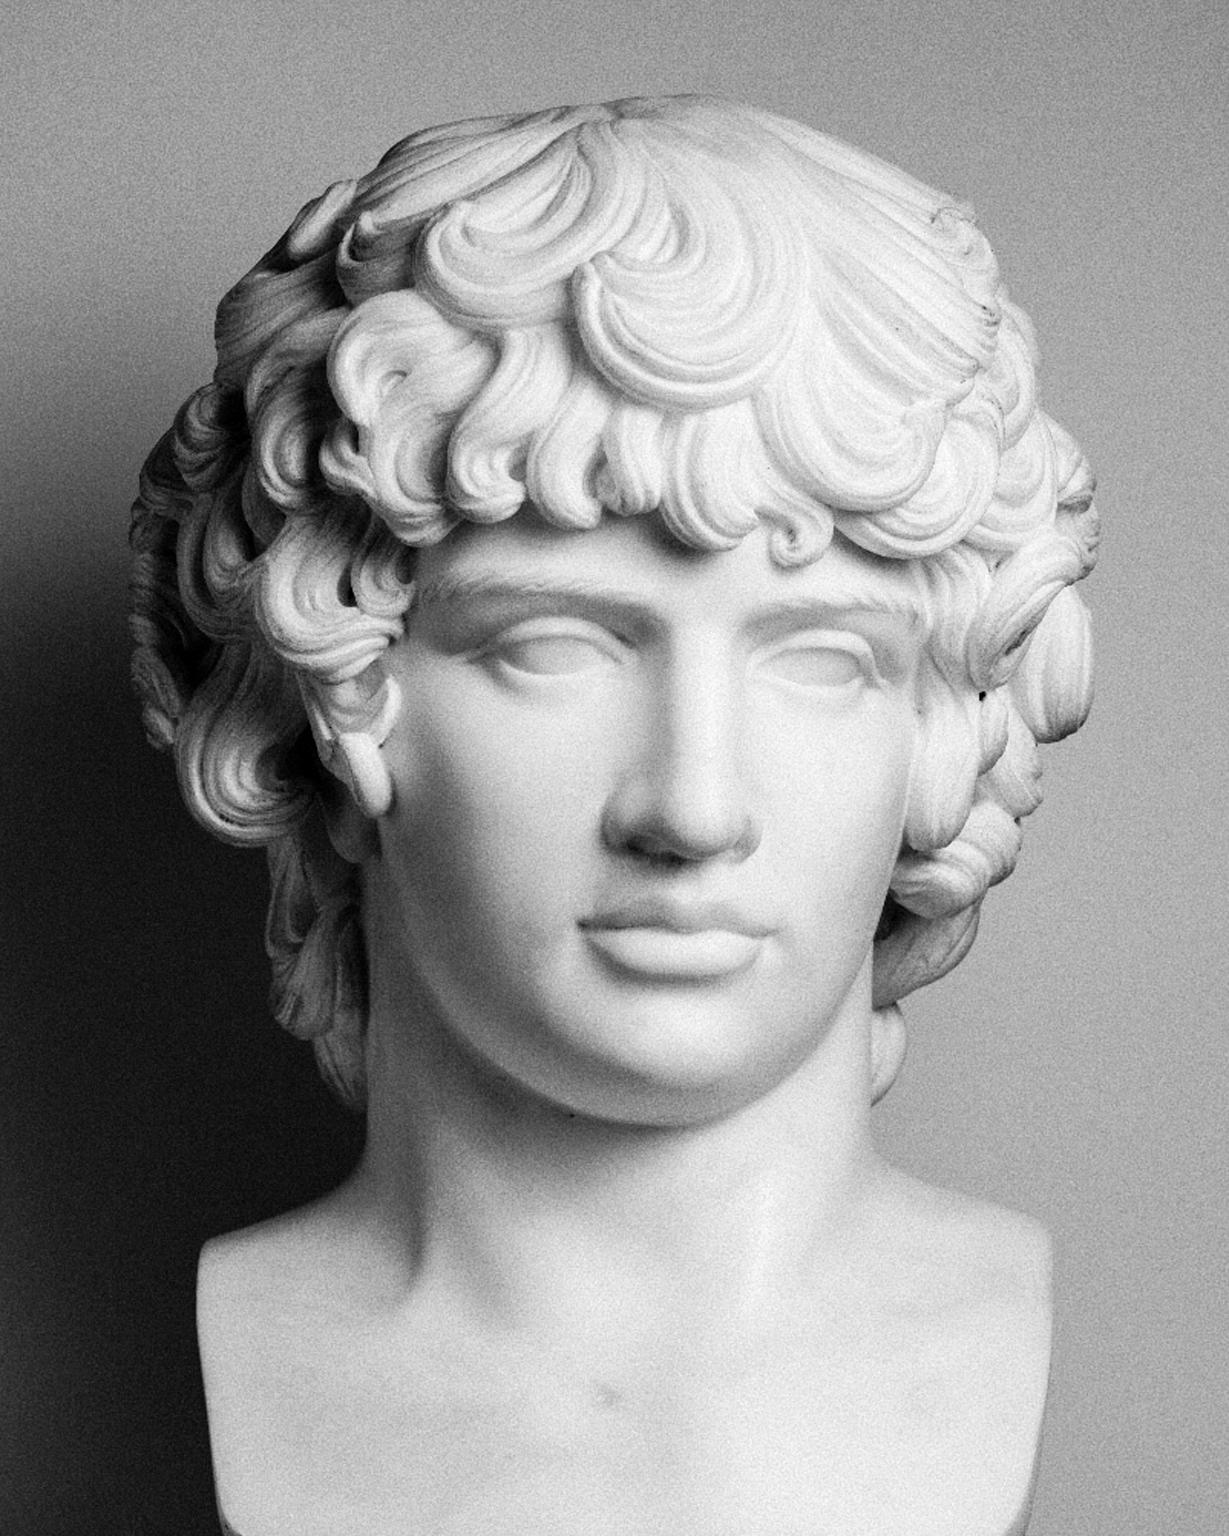 Neoclassical sculpture from the beginning of the 19th century
Portrait of Antinous from the antique.

Carrara marble; base red Levanto marble 
State of conservation: excellent 

Measures: 20.47 in x 9.44 in x 9.84 in
52 cm x 24 cm x 25